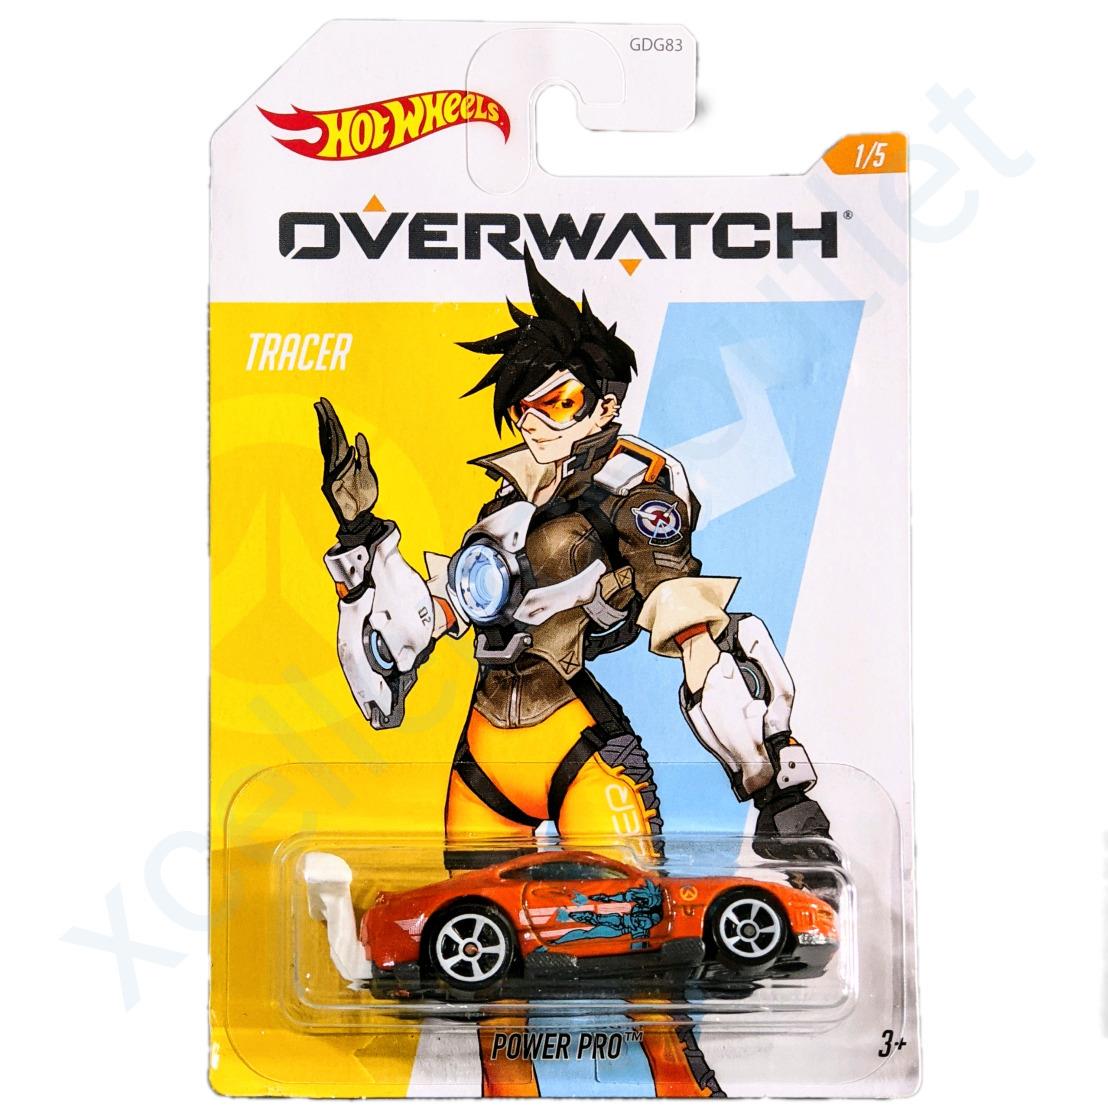 Hot Wheels Over Watch Series Overwatch Collectable Die-cast Mini Cars Set of 5